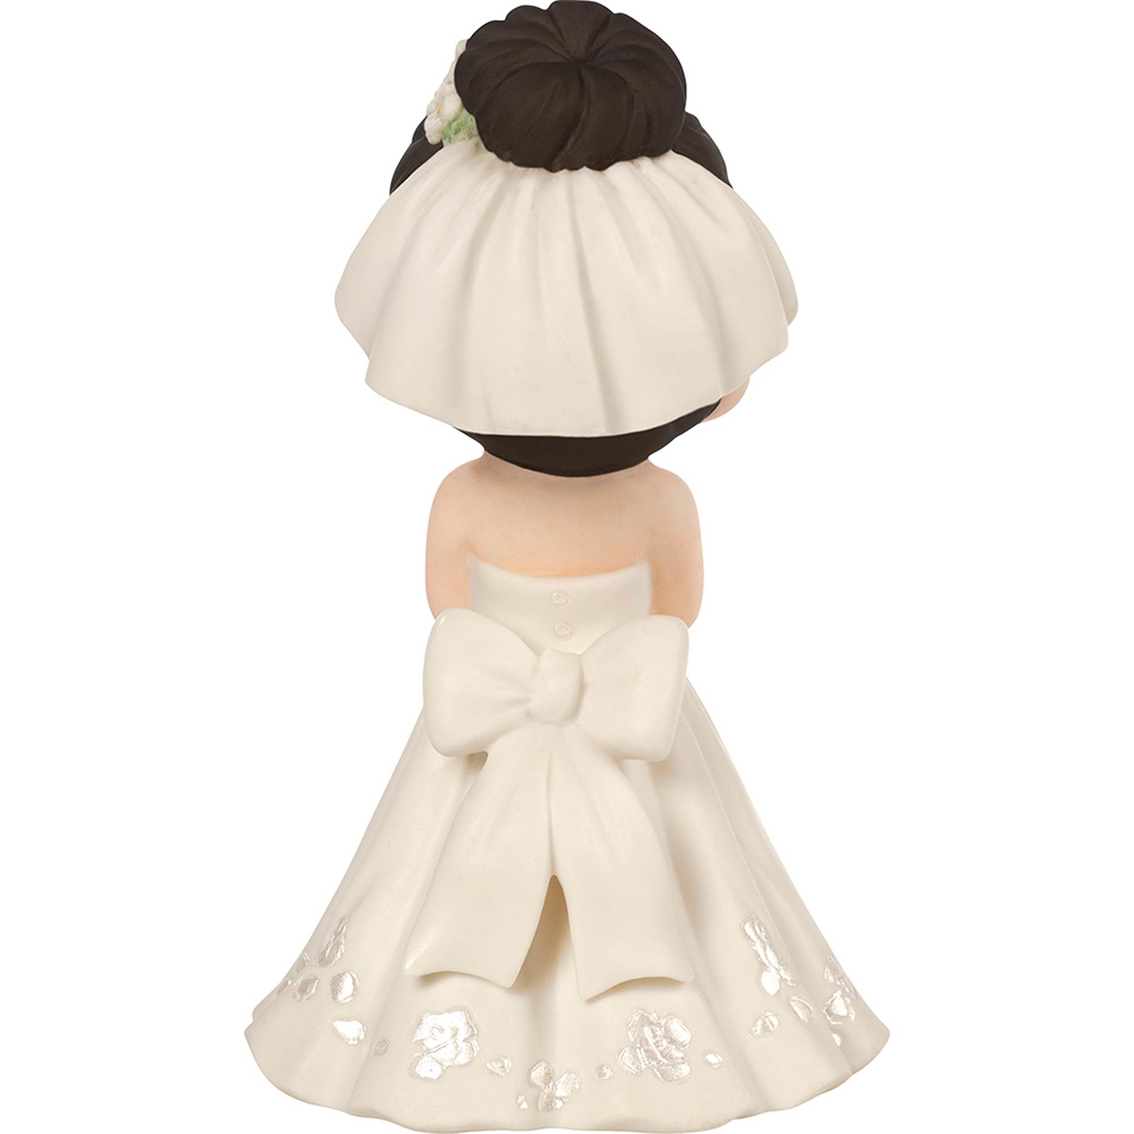 Precious Moments Mix and Match Bride Figurine, Black Hair, Light Skin Tone - Image 2 of 4